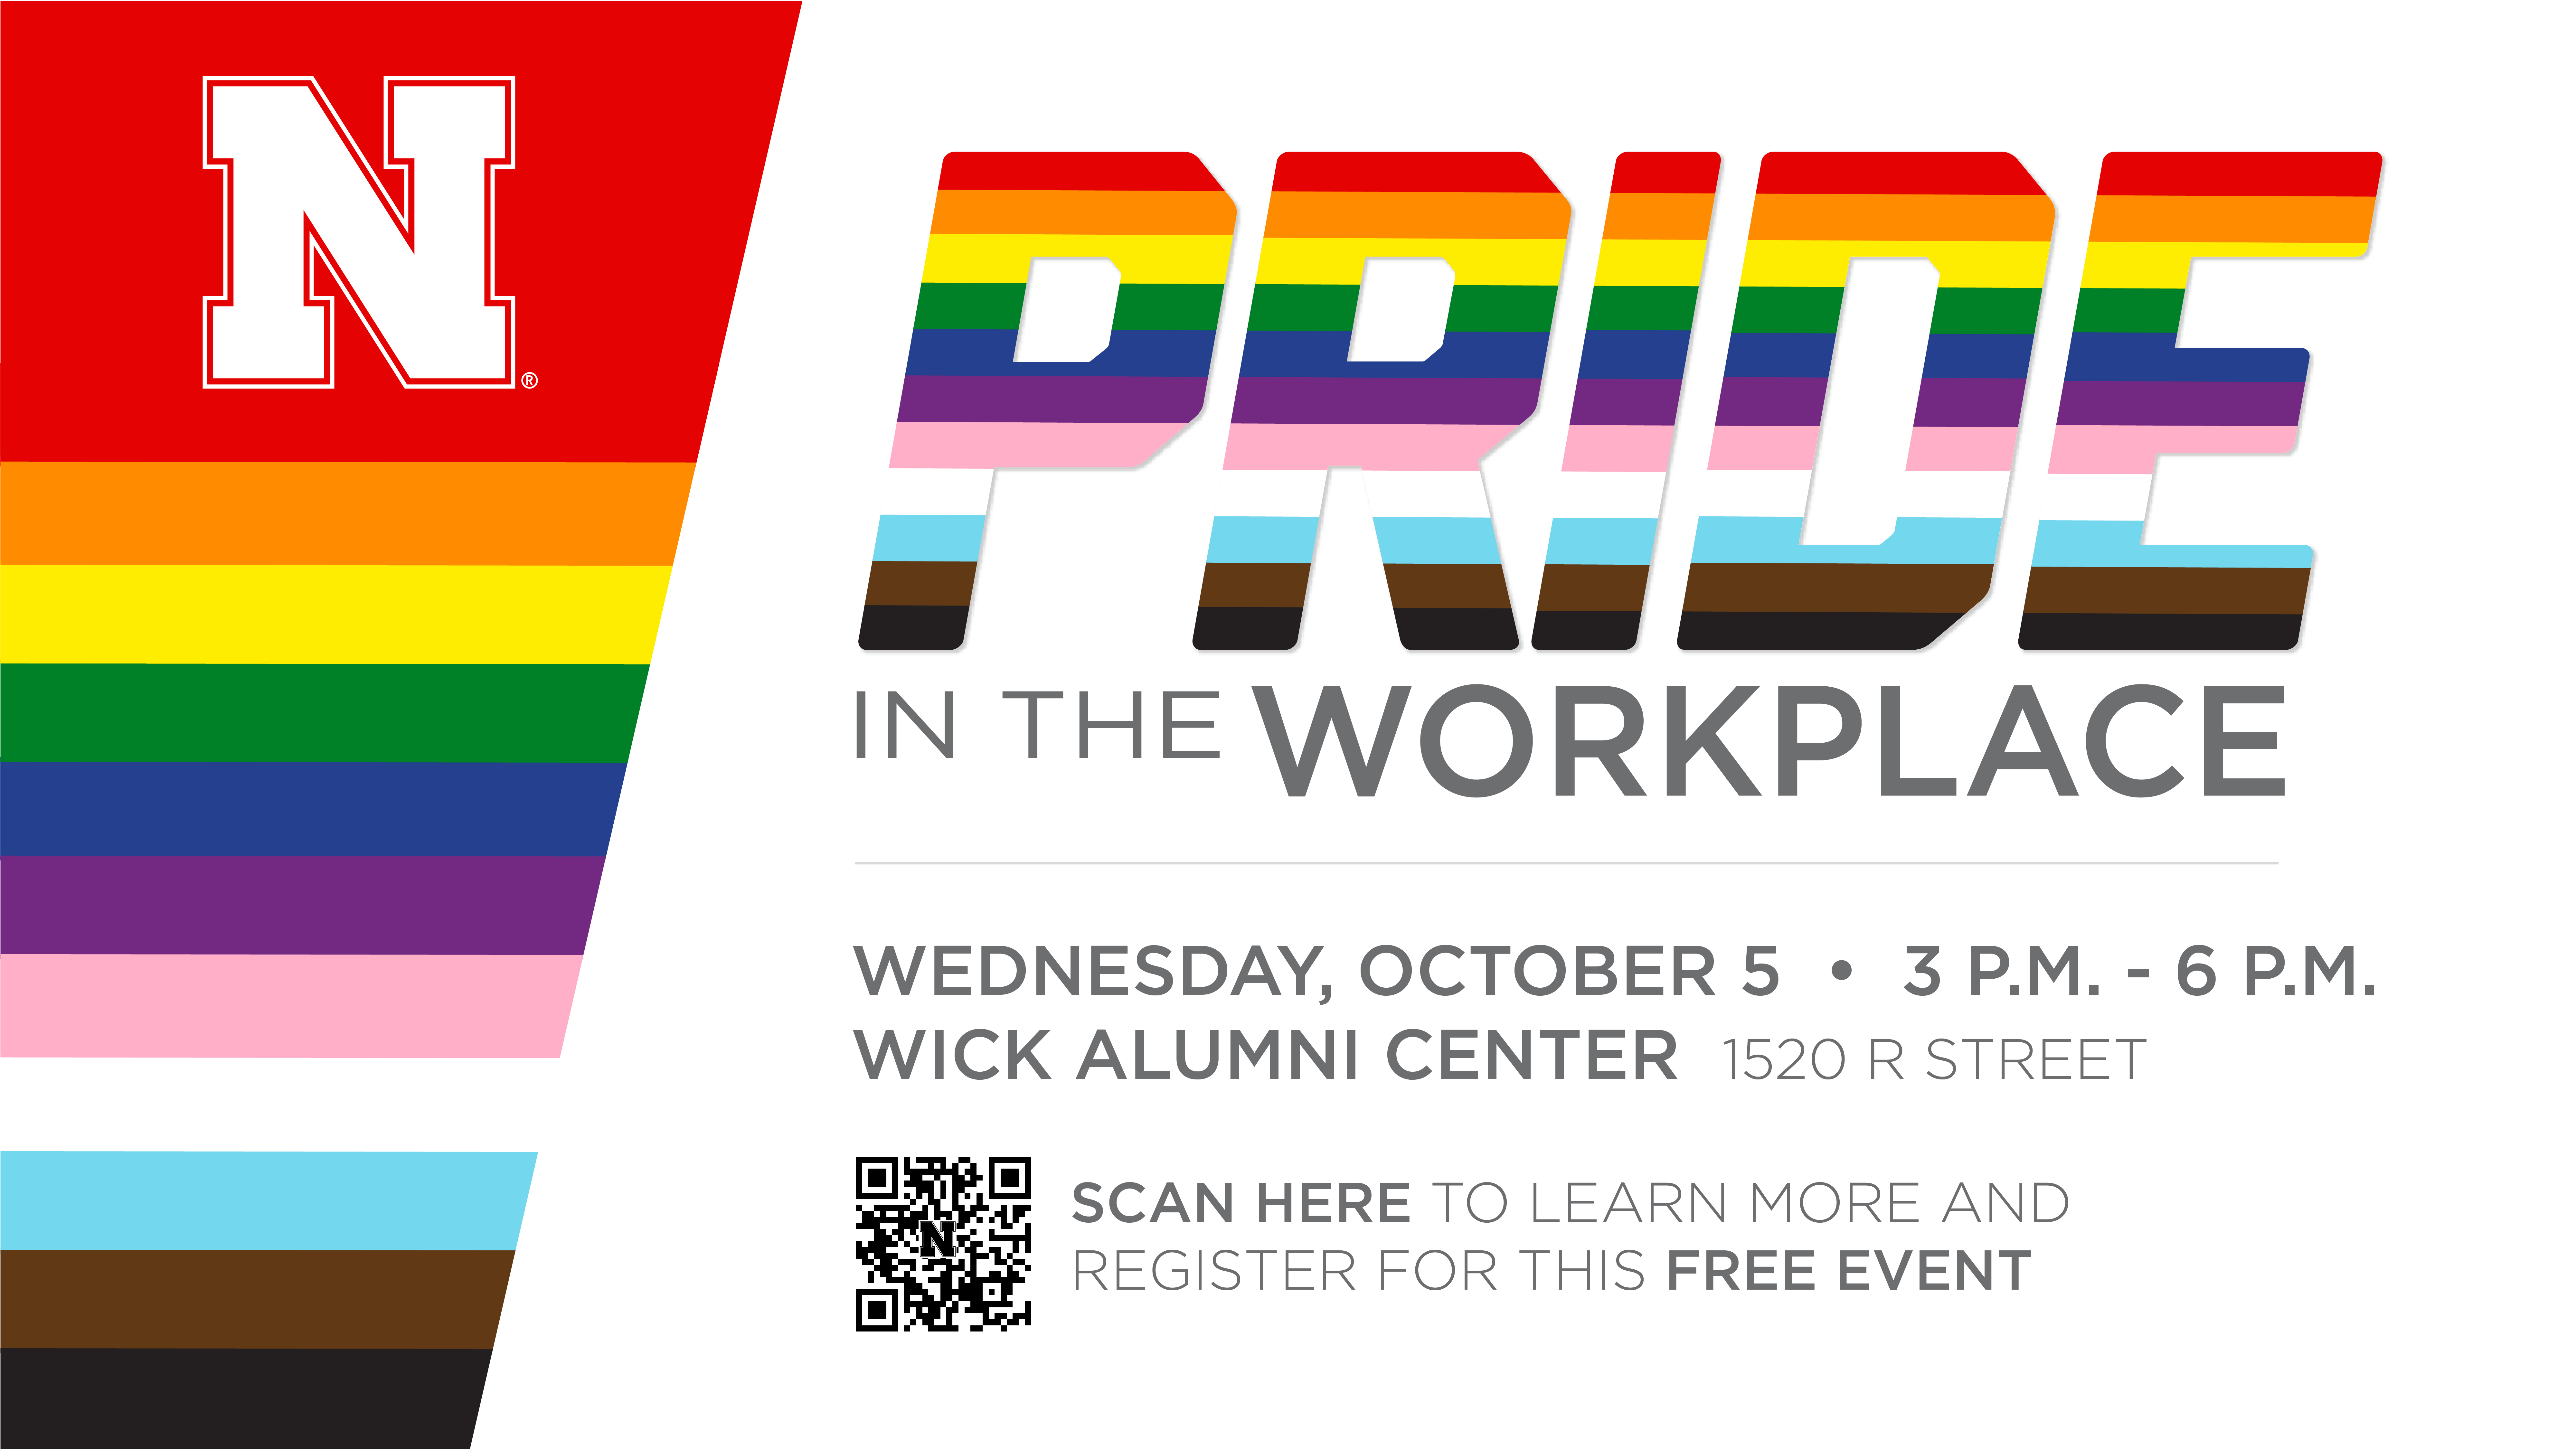 LGBTQA+ students, UNL faculty and staff, and all who value inclusion are invited to Pride in the Workplace, Wednesday, October 5, 3-6 p.m. at the Wick Alumni Center, 1520 R Street. 